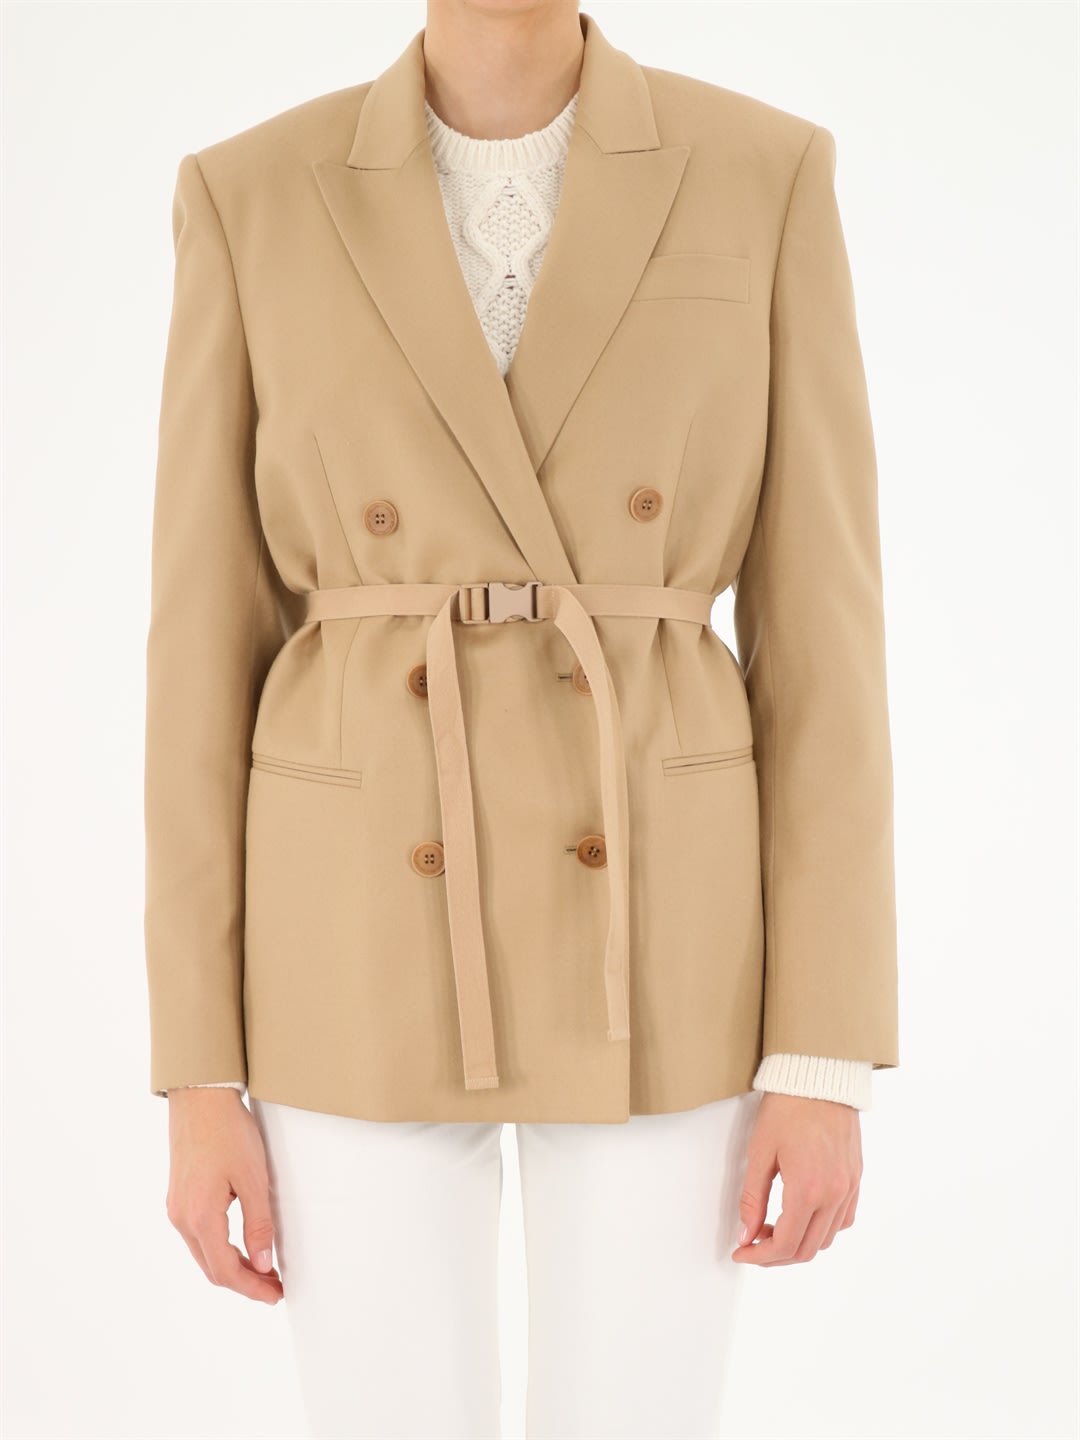 Stella McCartney Double-breasted Tailored Wool Jacket